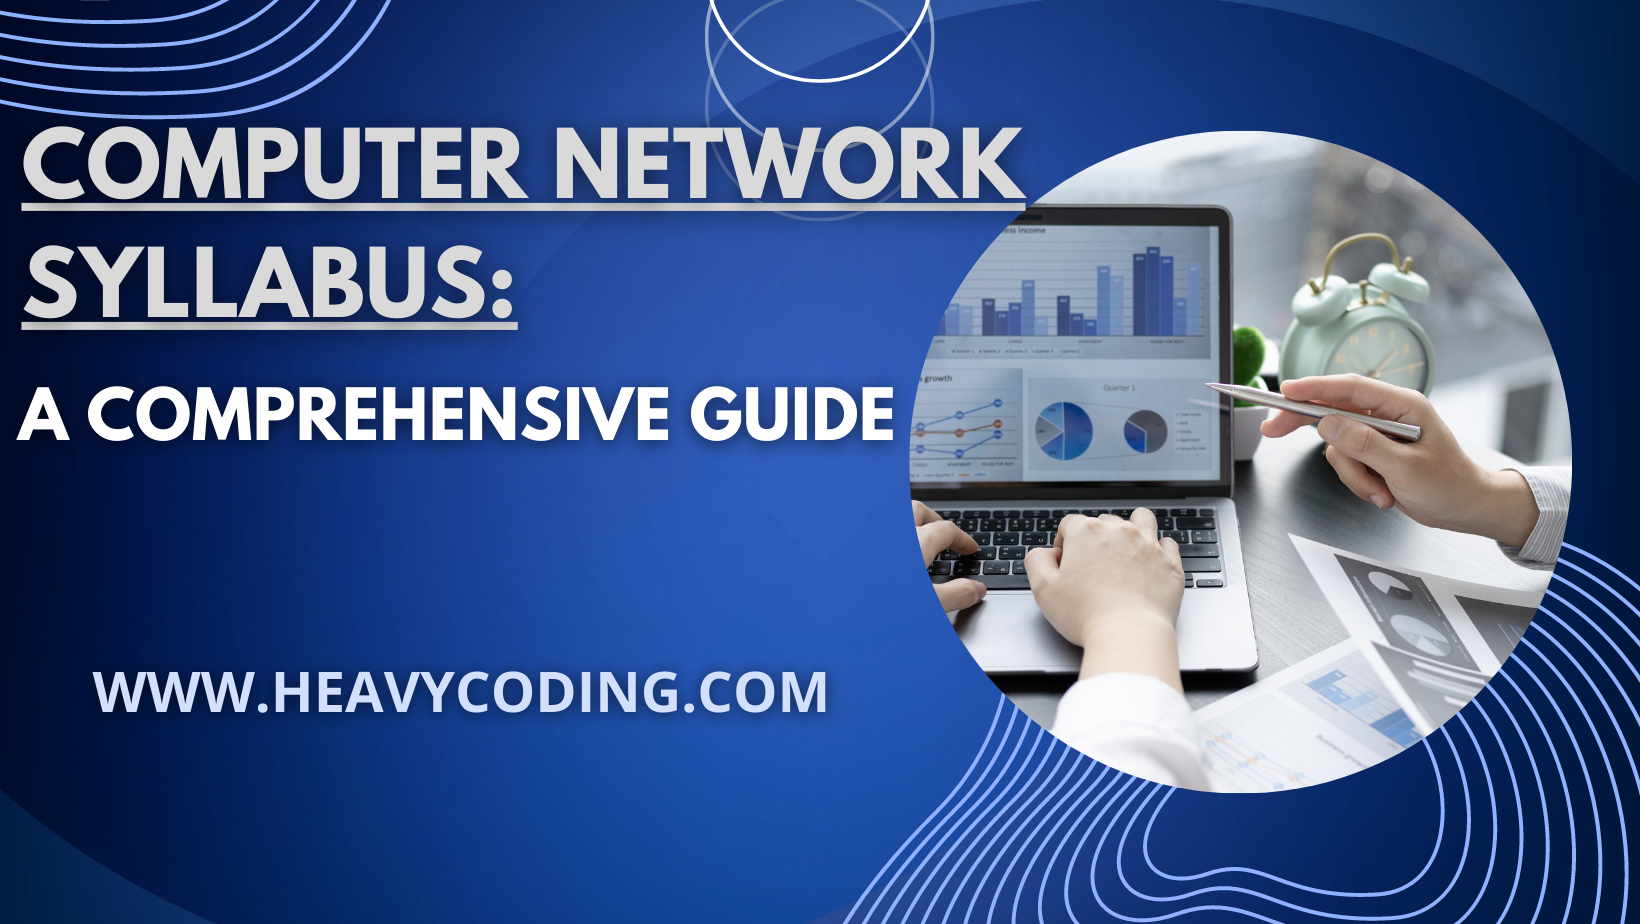 You are currently viewing Computer Network Syllabus: A Comprehensive Guide